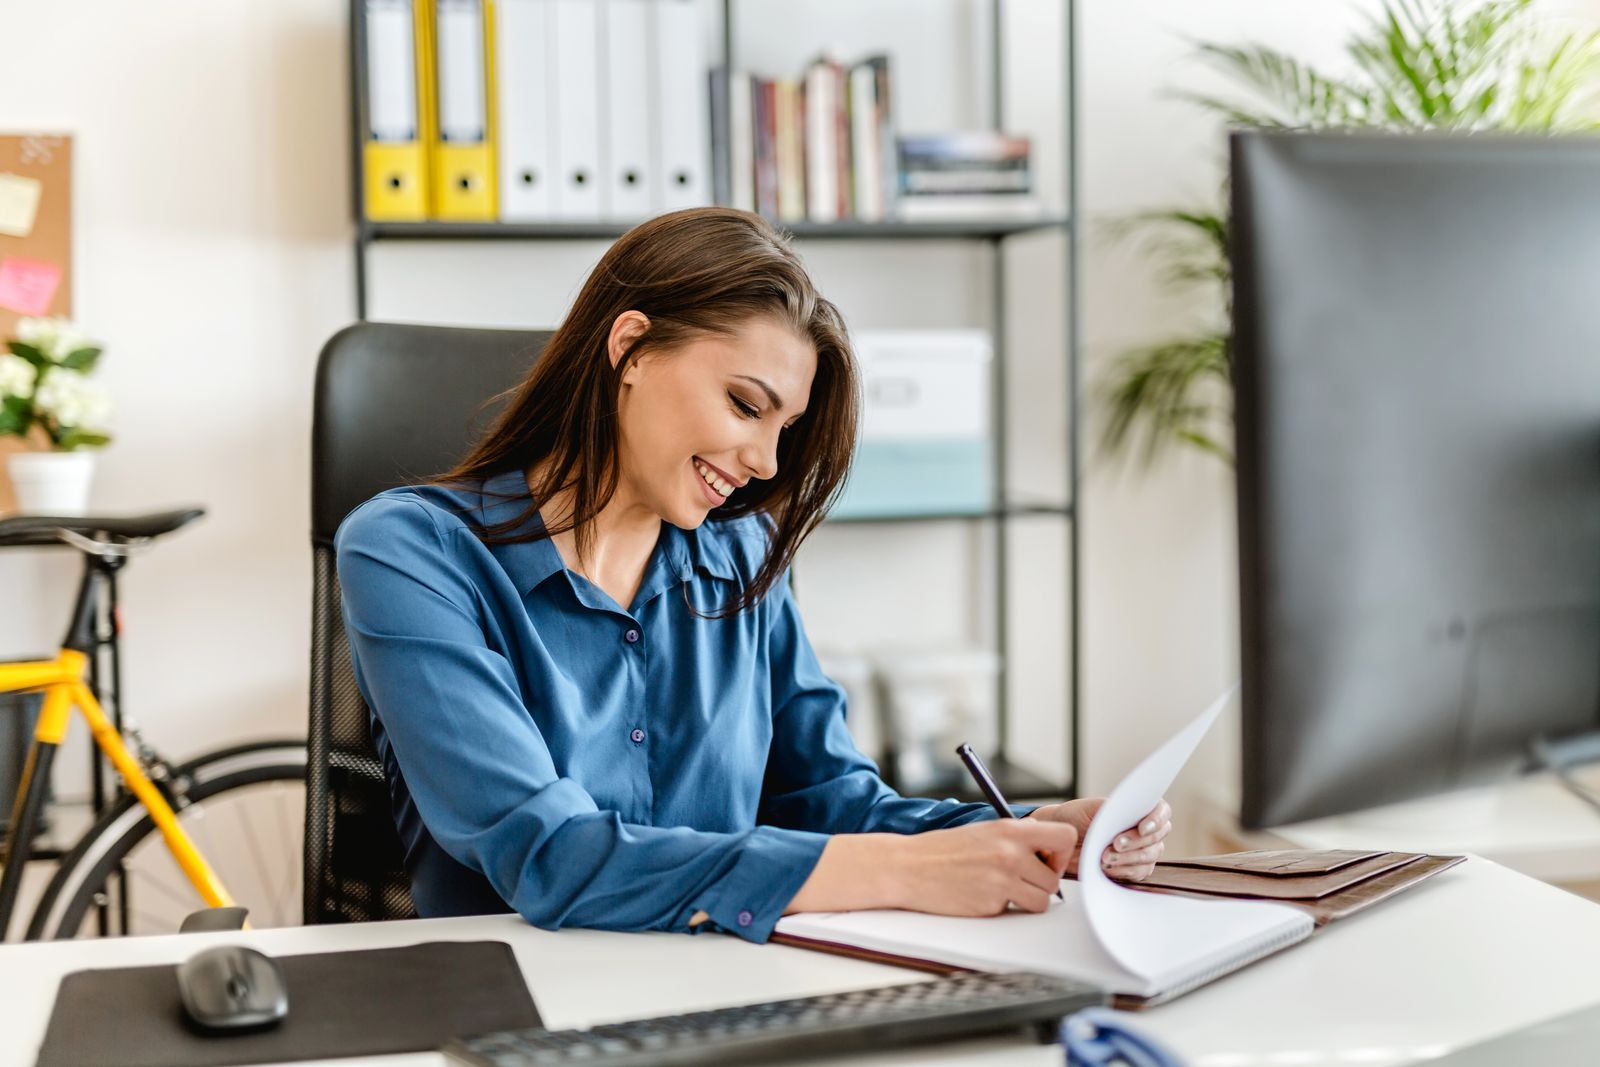 Happy woman working at her desk